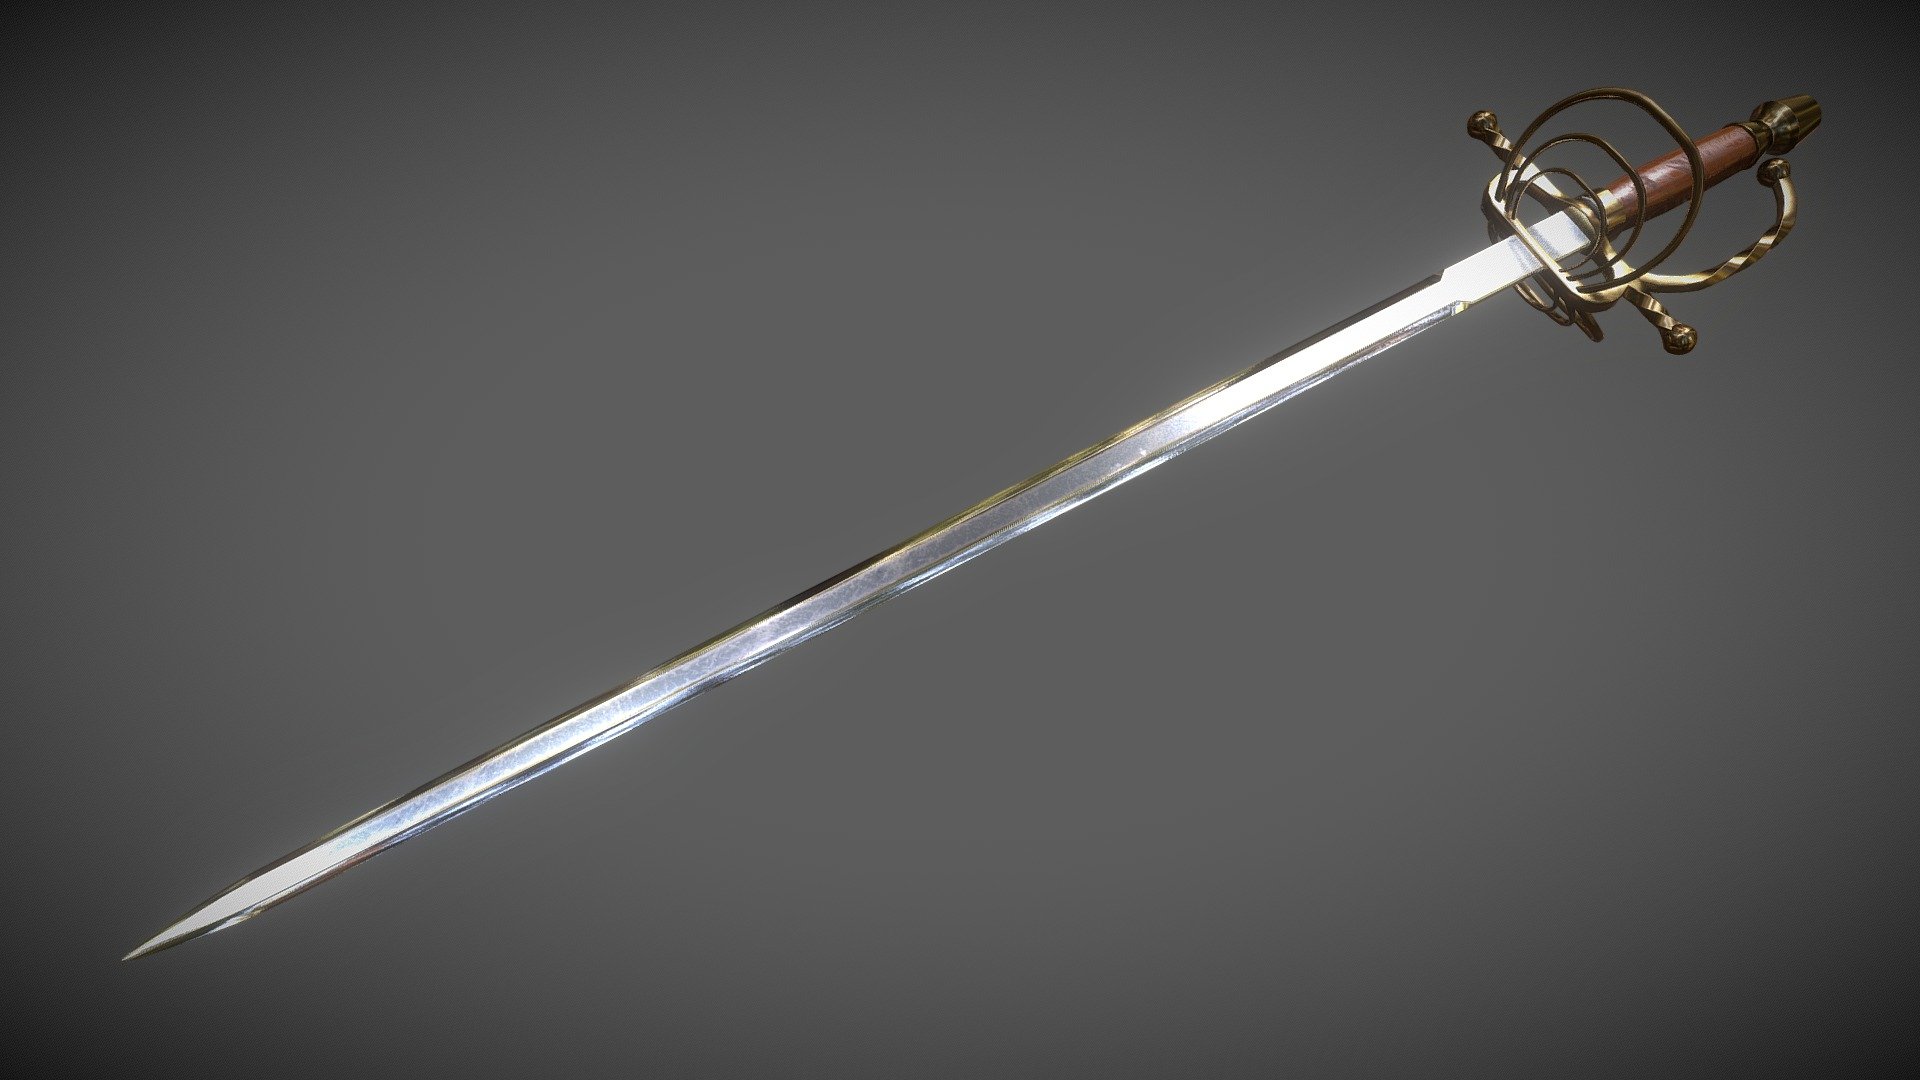 A clamshell Rapier game ready asset with texture packs included for UE4 and Unity as well as Standard Metalic PBR 3d model